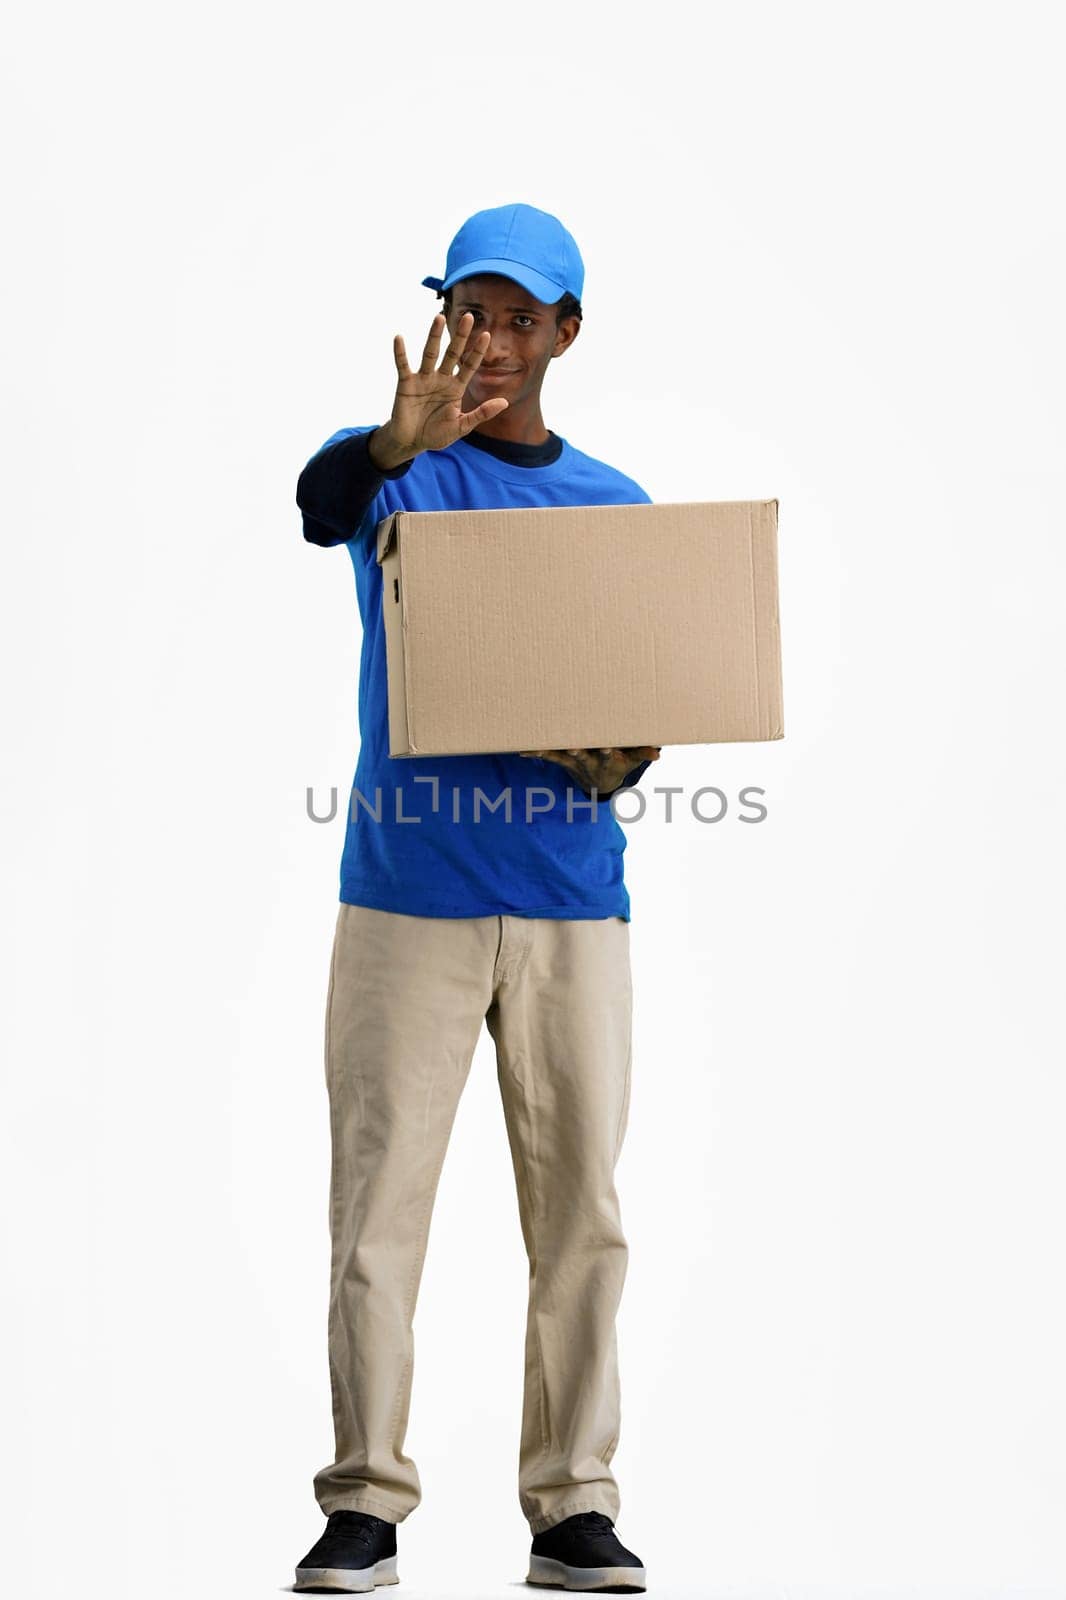 The deliveryman, in full height, on a white background, with a box, shows a stop sign by Prosto